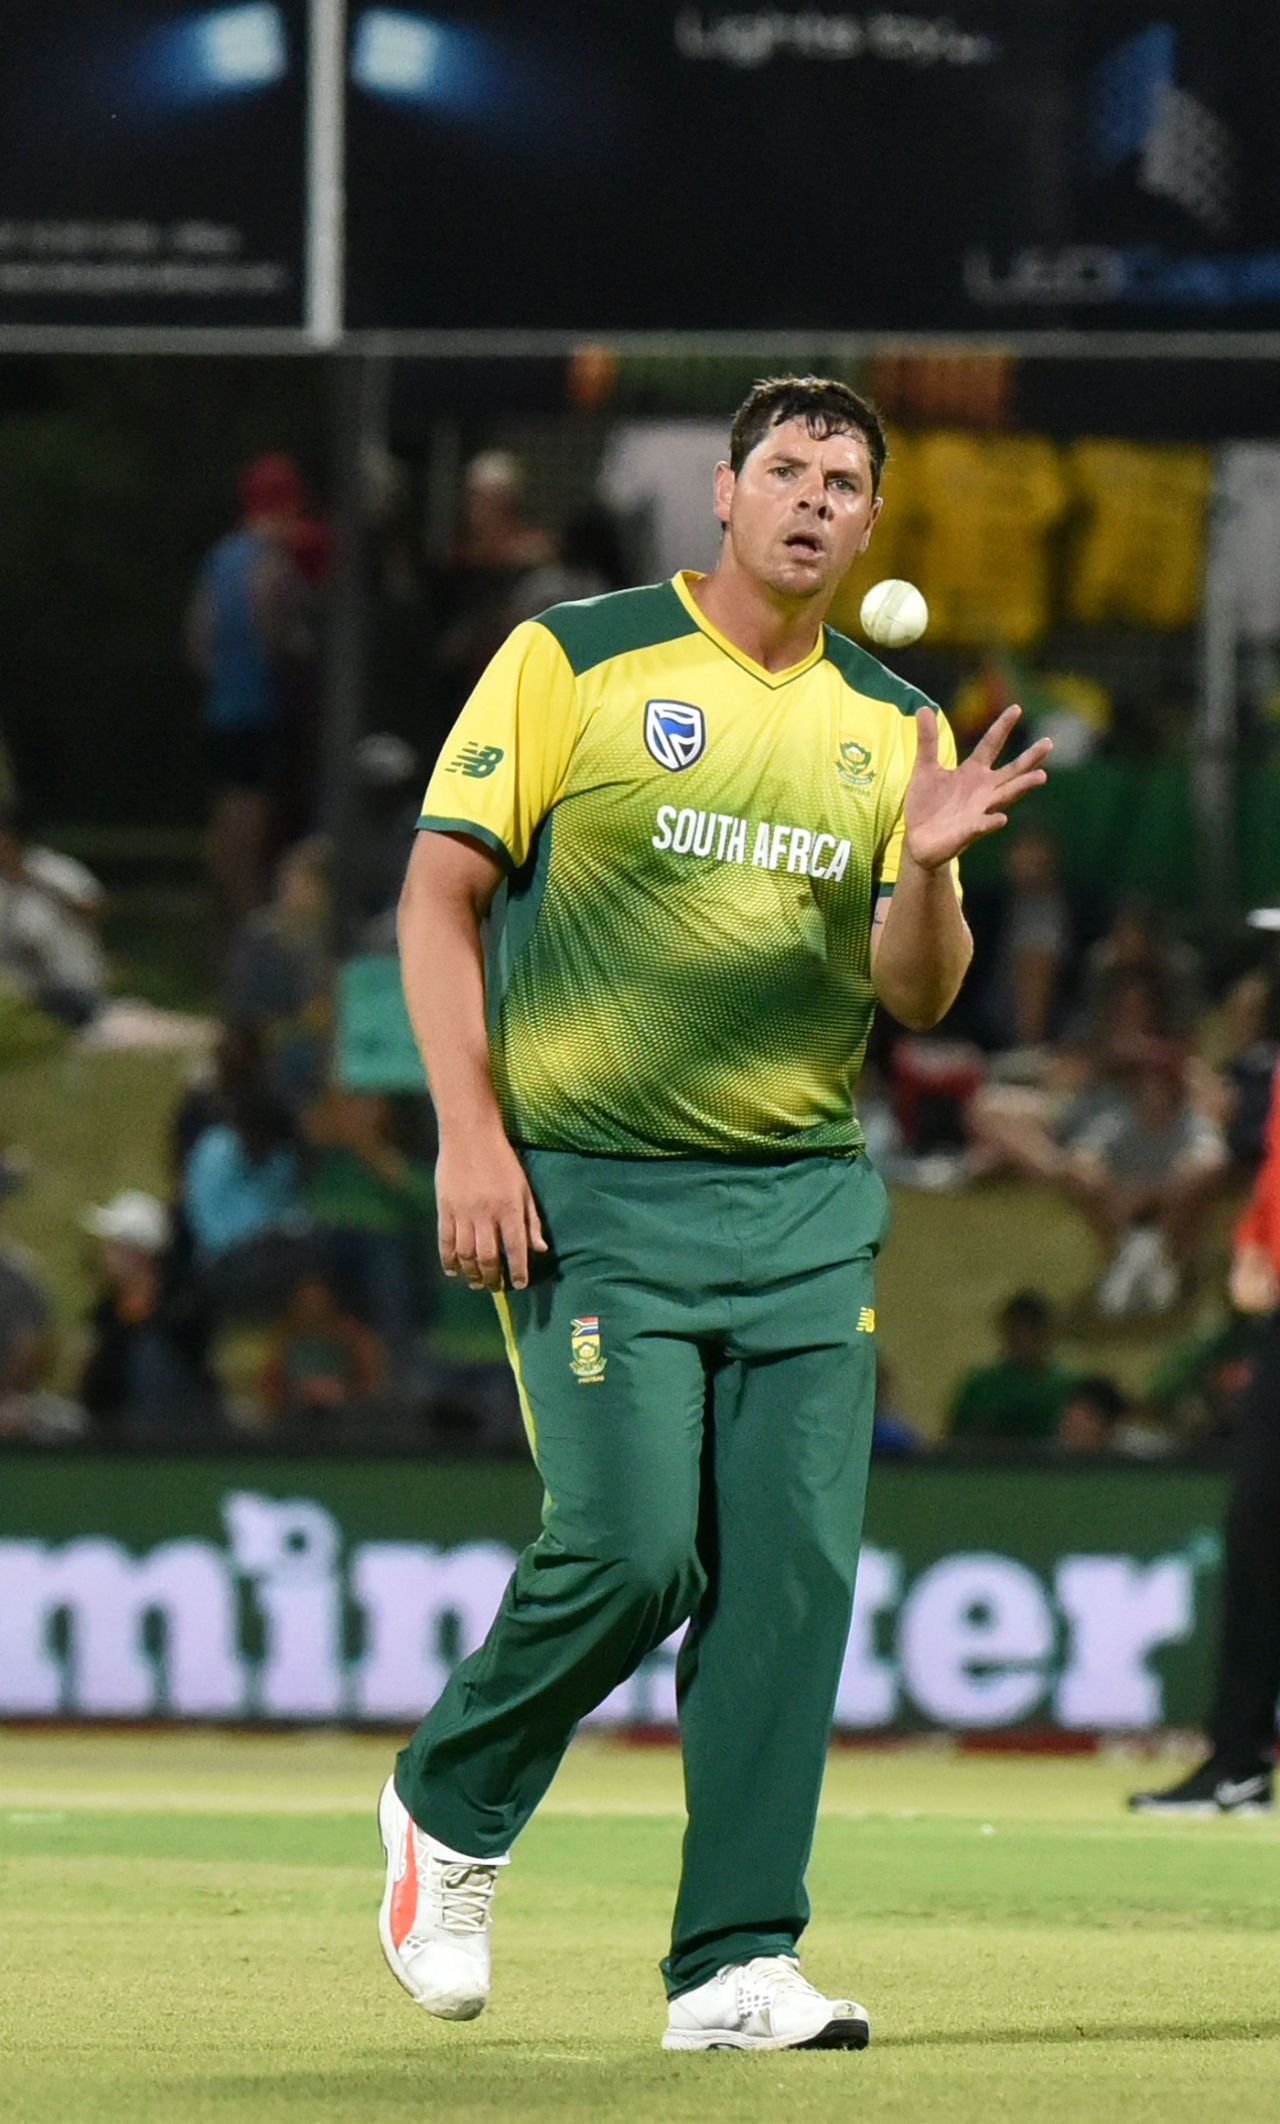 The 33-year old Robbie Frylinck took two wickets on debut, South Africa v Bangladesh, 1st T20I, Bloemfontein, October 26, 2017